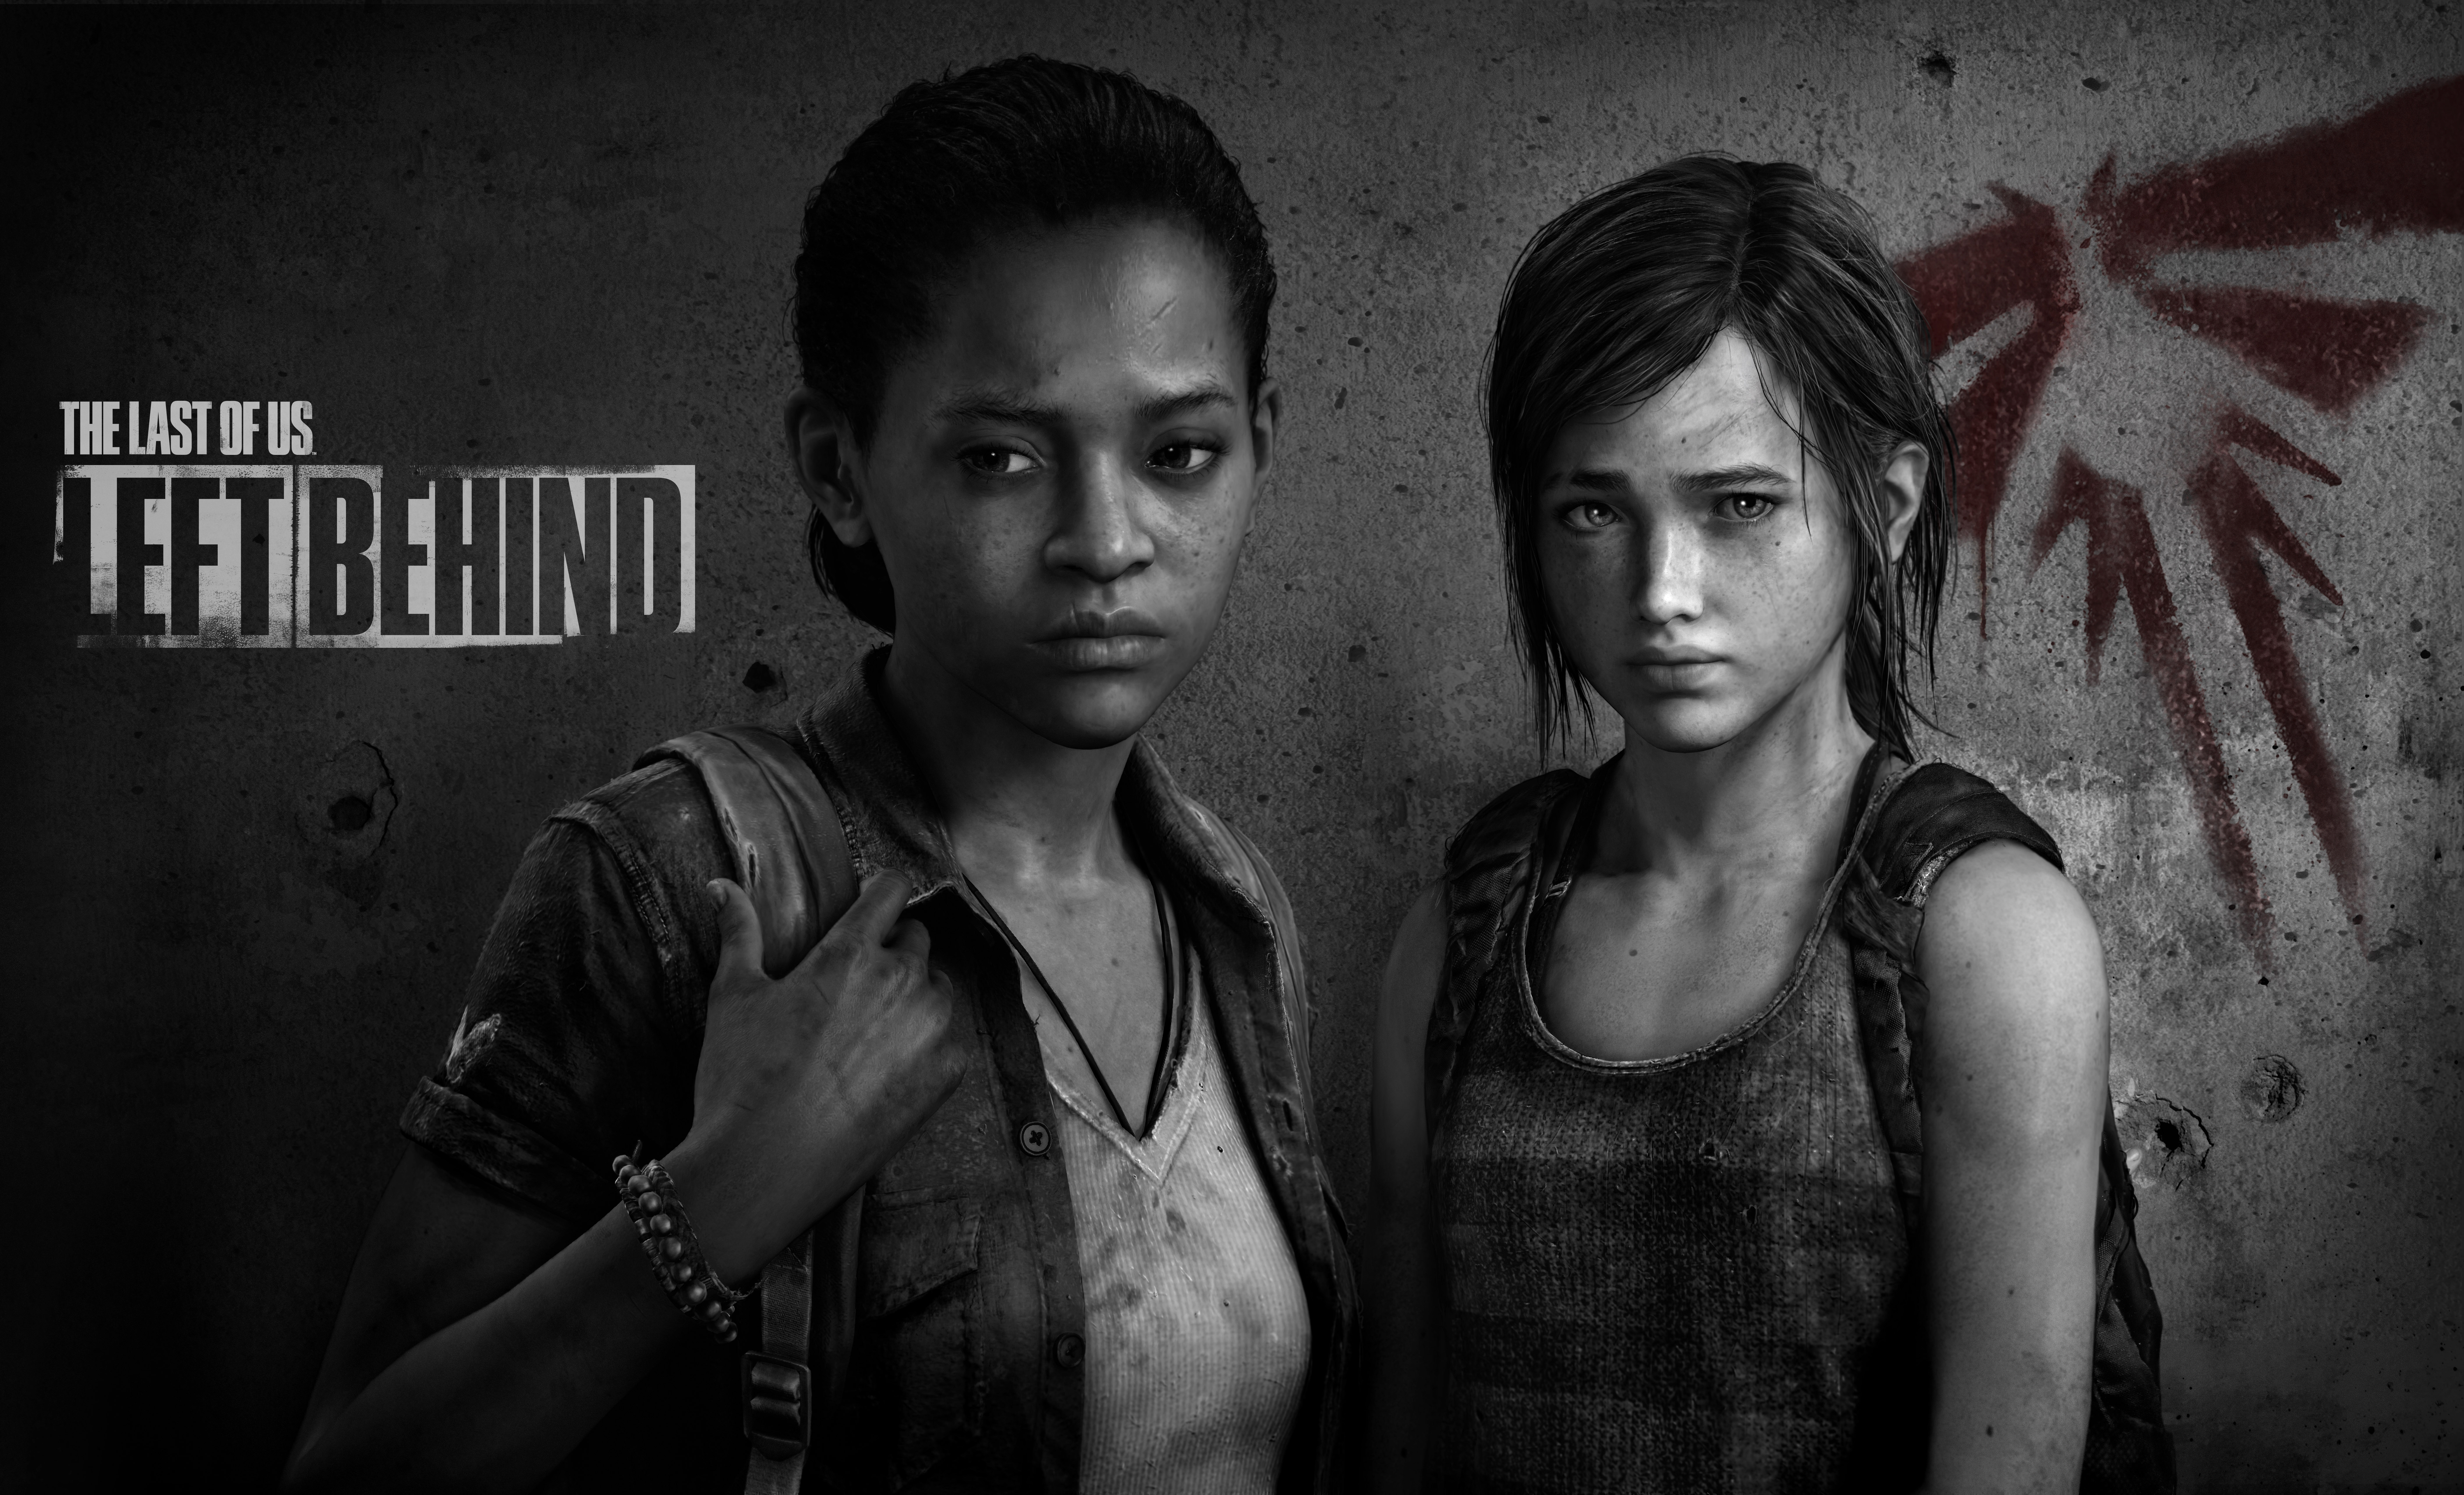 Ellie The Last Of Us Left Behind , HD Wallpaper & Backgrounds